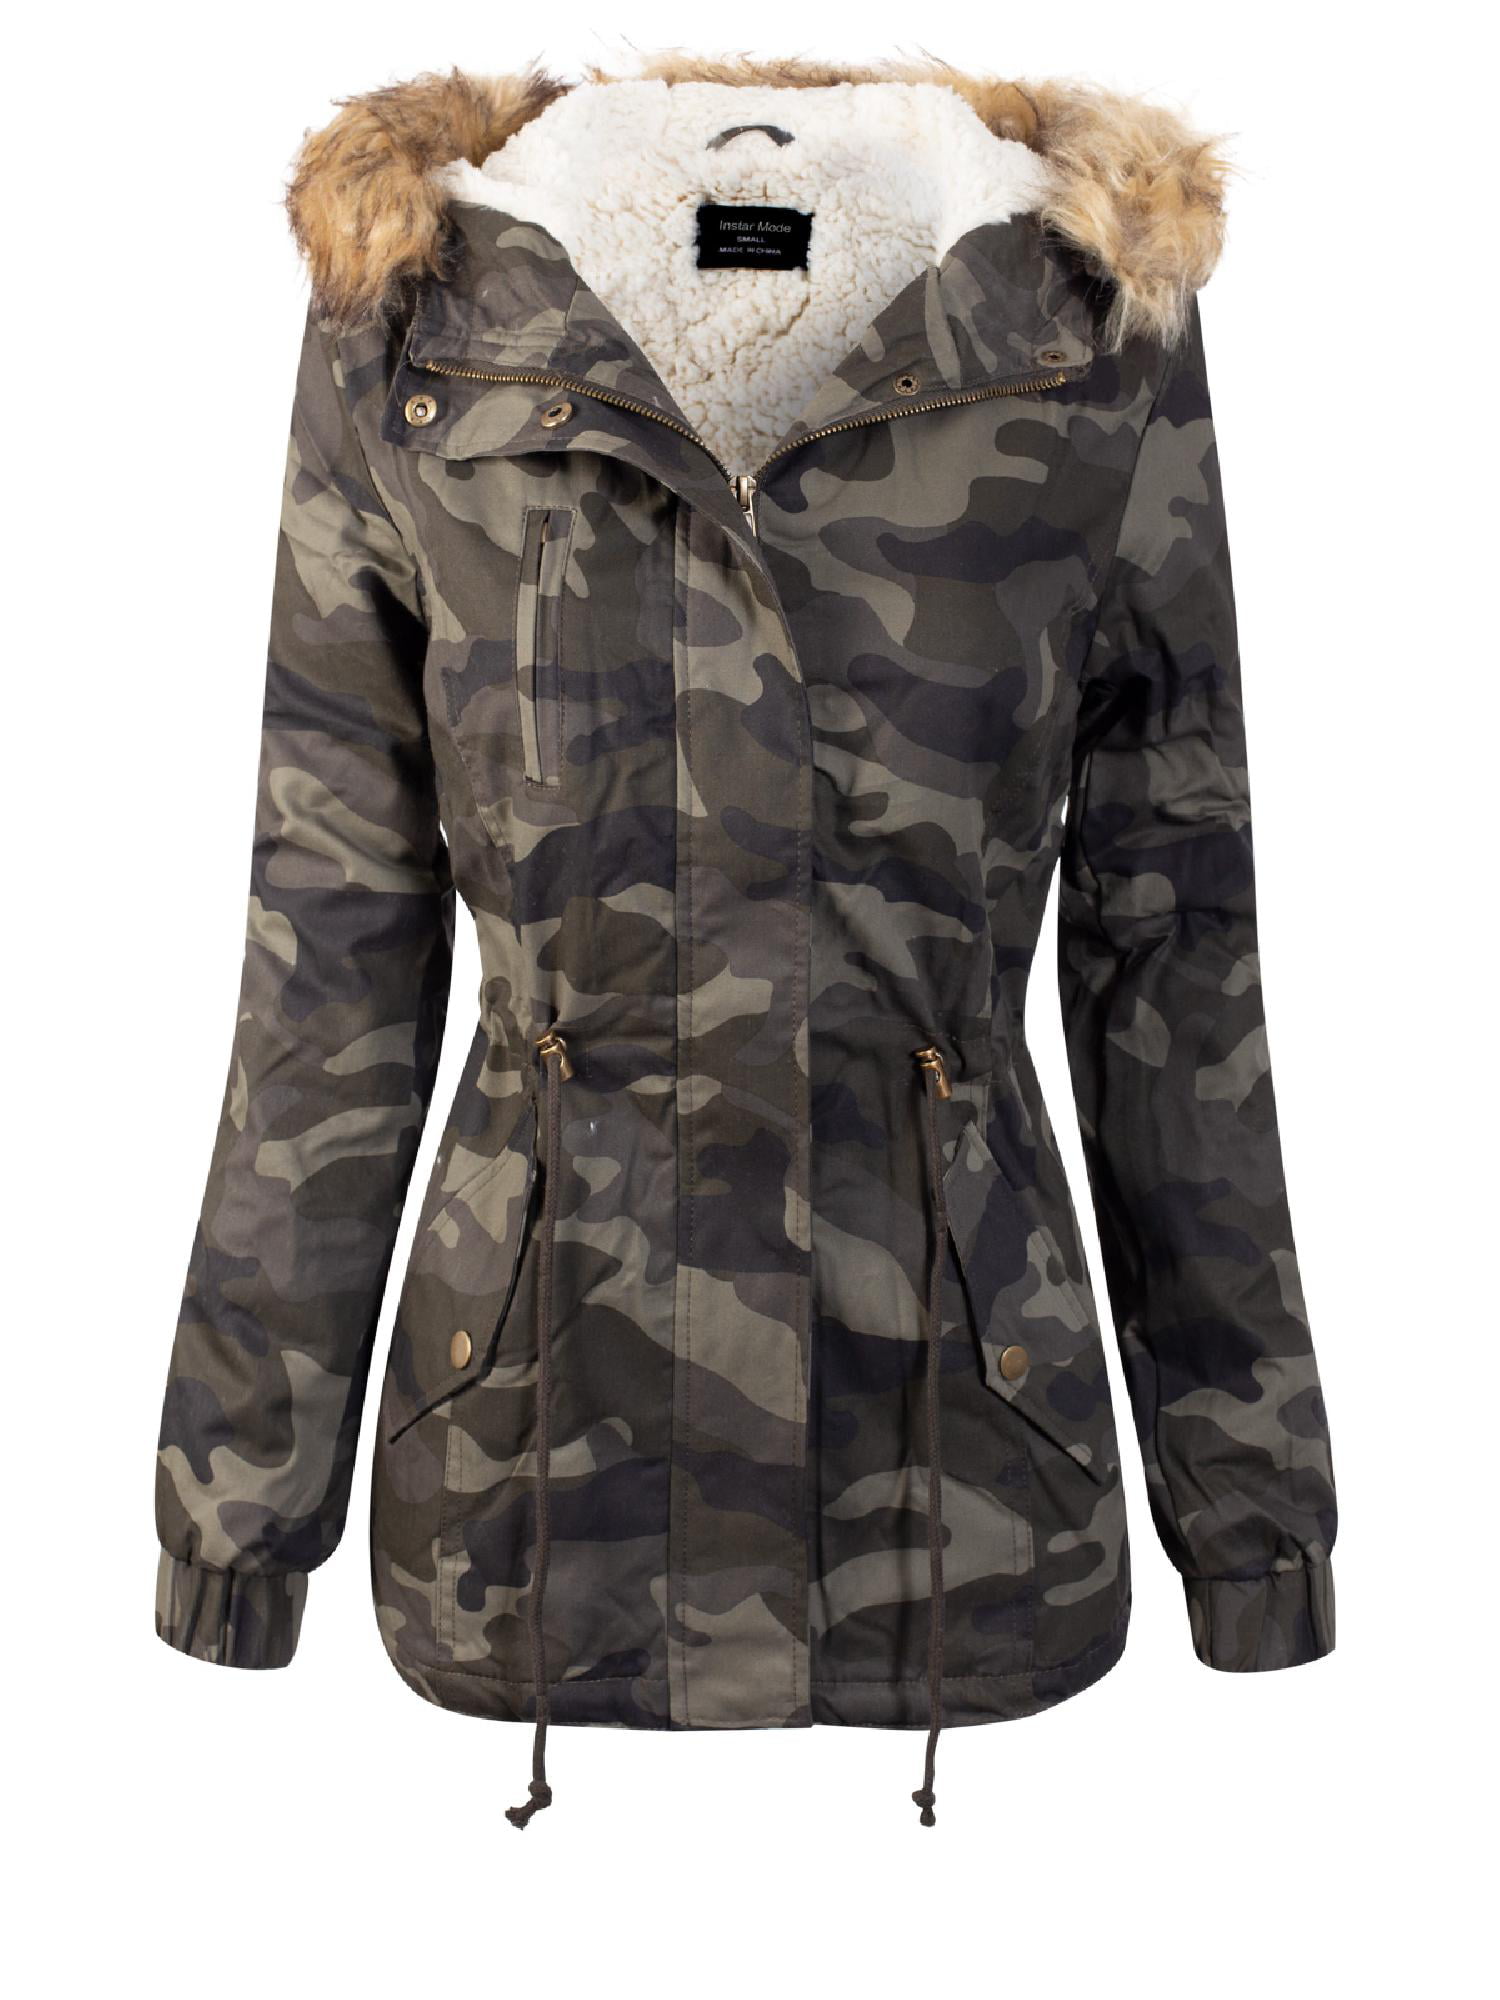 Made by Olivia - Made by Olivia Women's Camouflage Sherpa Lined Hooded ...